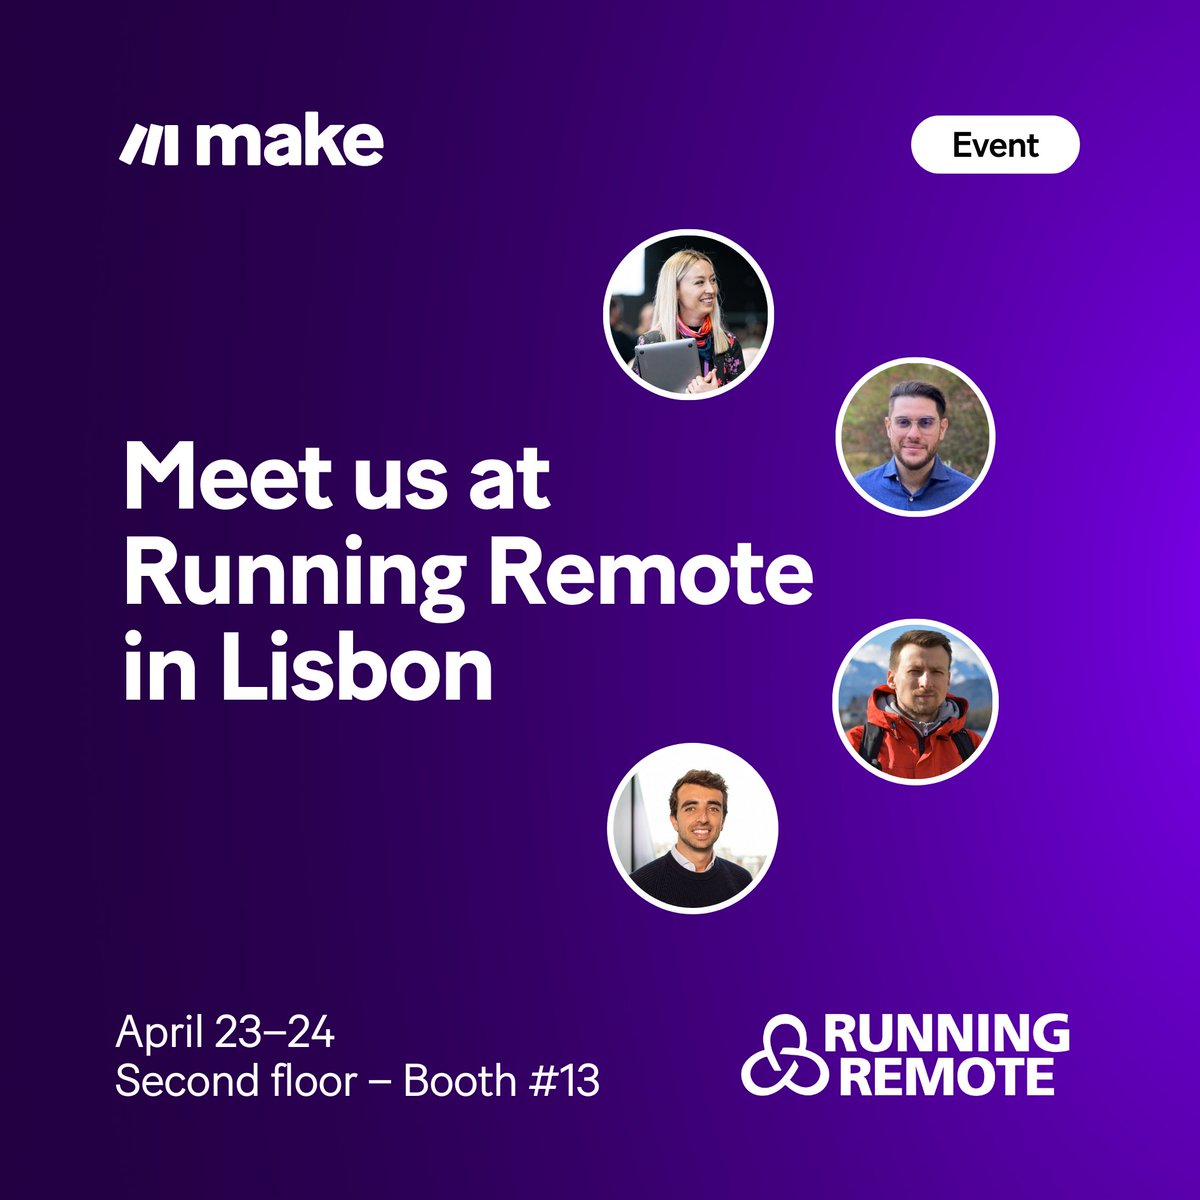 The fastest-growing #conference on flexible work, @RunningRemote, kicks off next week in #Lisbon 🇵🇹 👥 Our team will be there to connect and share insights! 🗣️ Plus, catch our Head of People, Polina in her session 'No office. No code. No worries.' this April 24, at 11:10 am